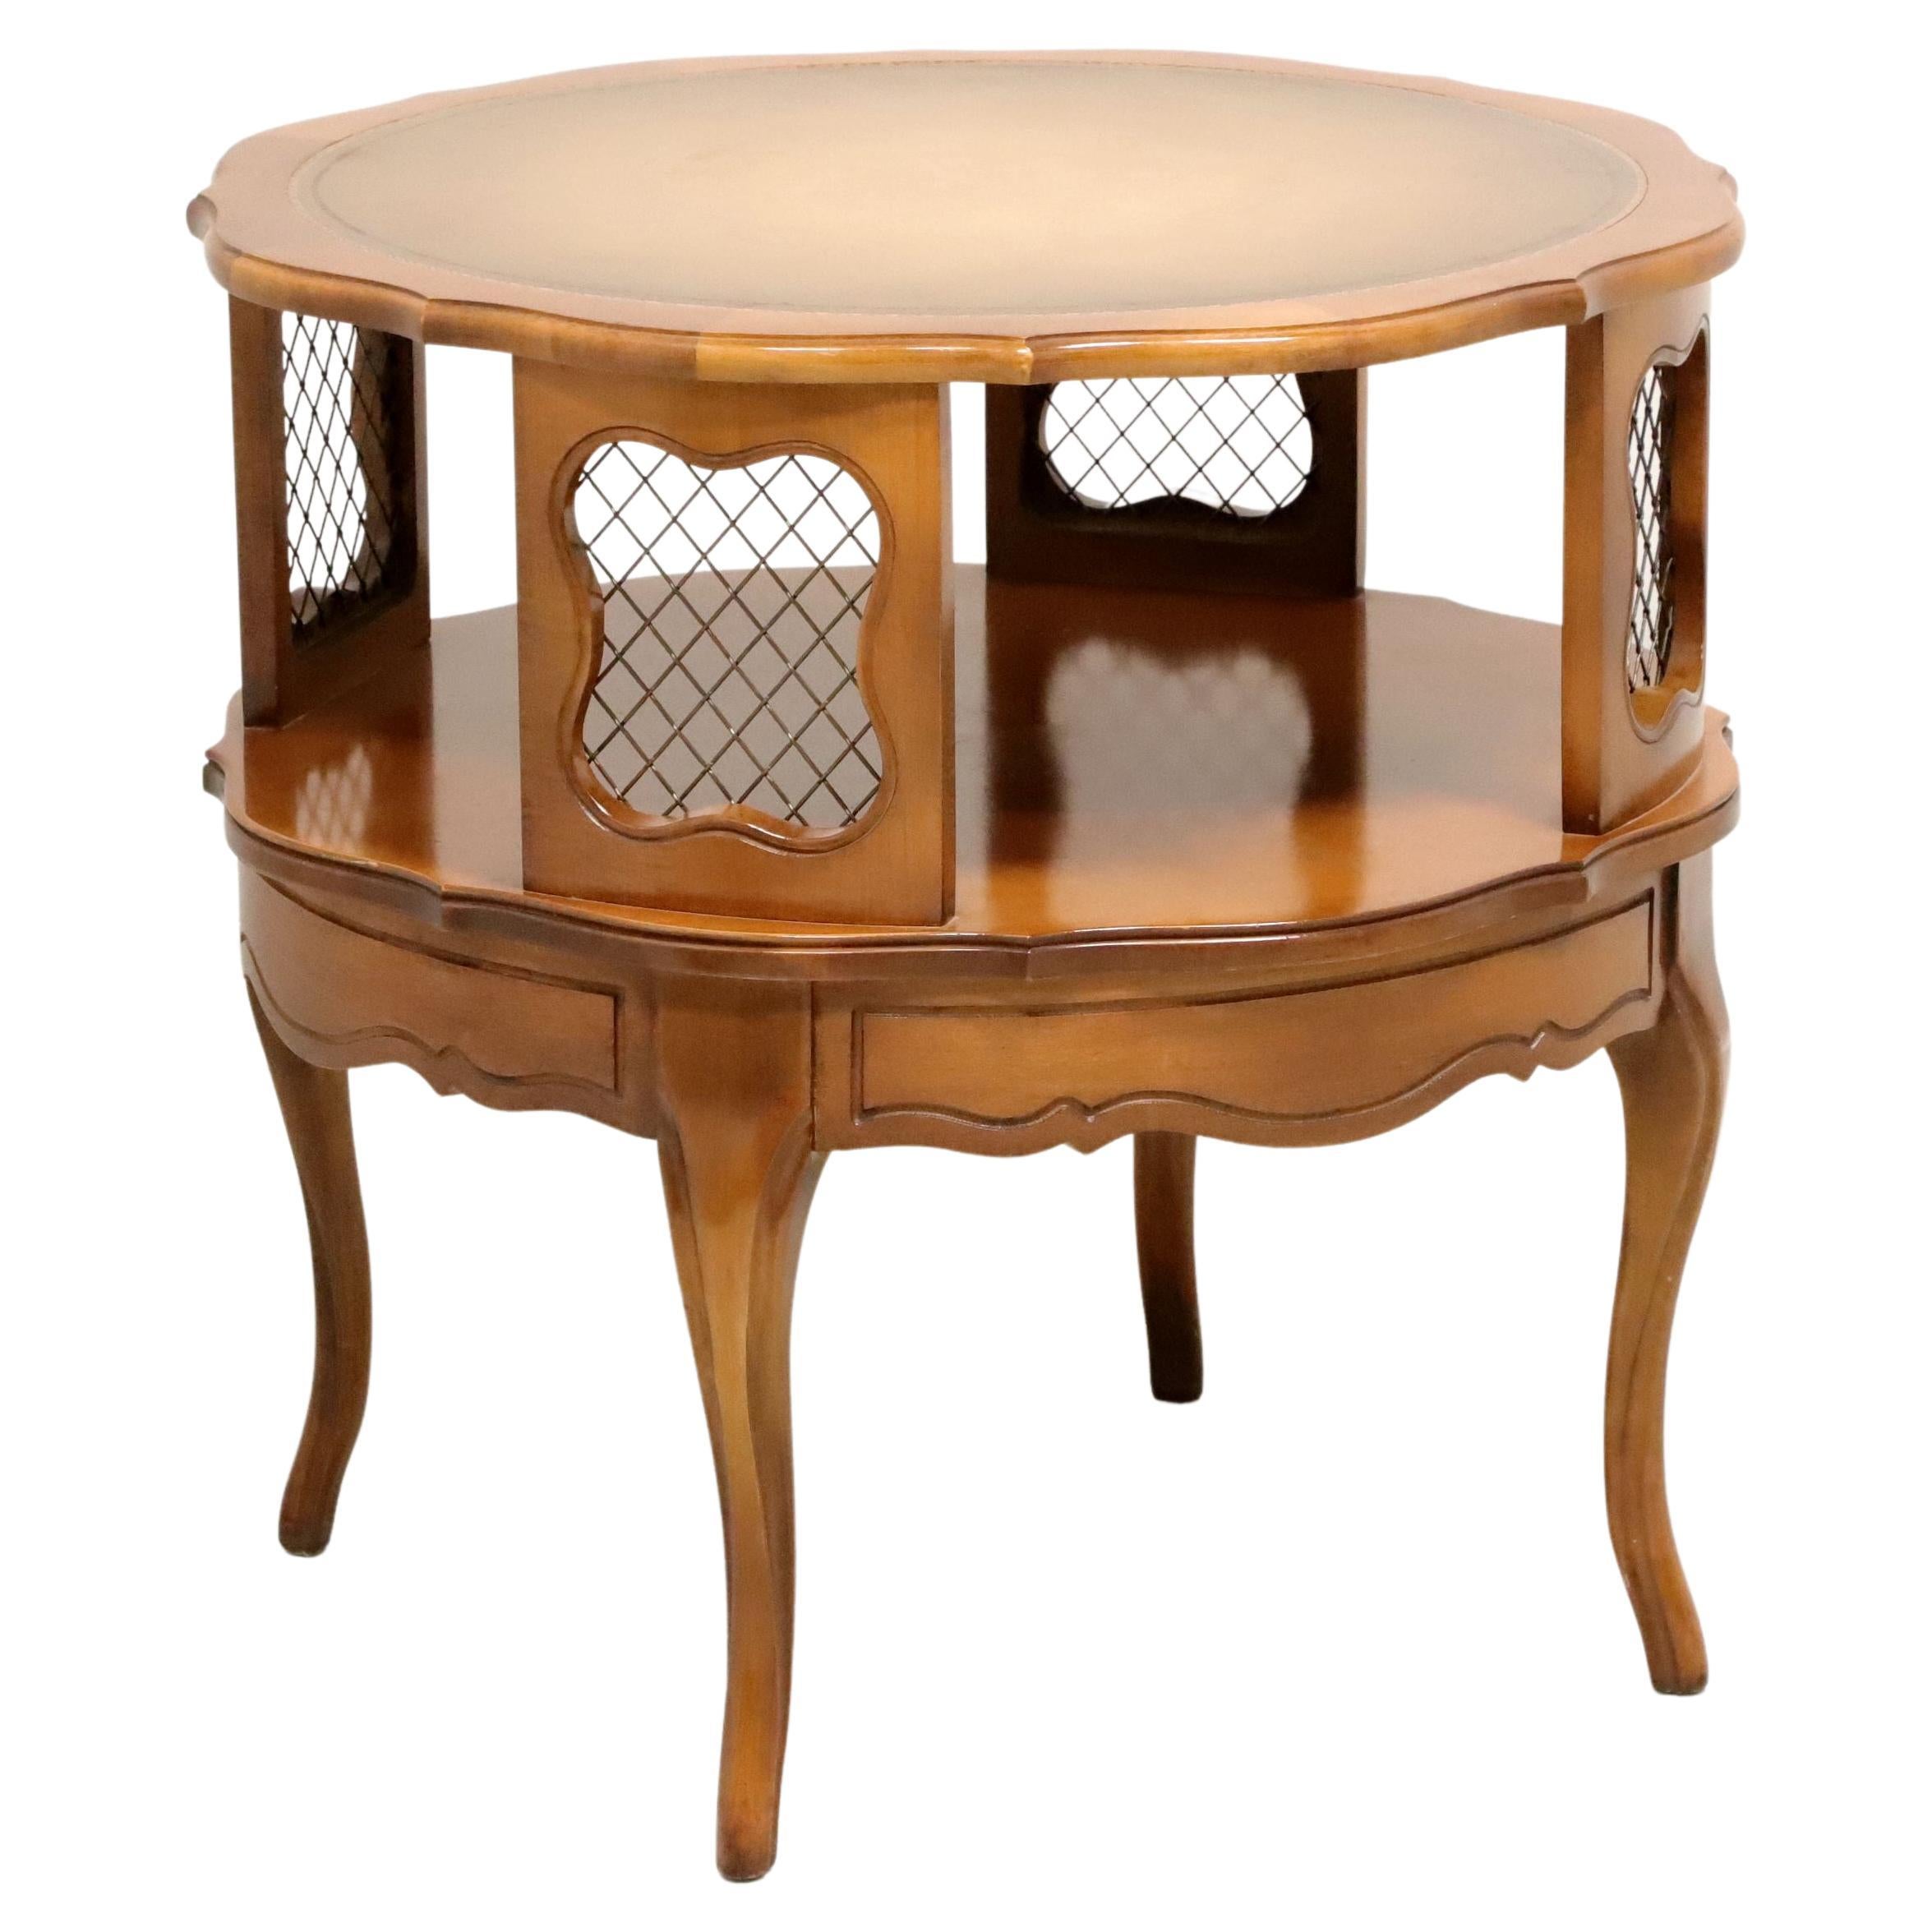 Mid 20th Century Hardwood, Brass Mesh & Leather French Round Accent Table For Sale